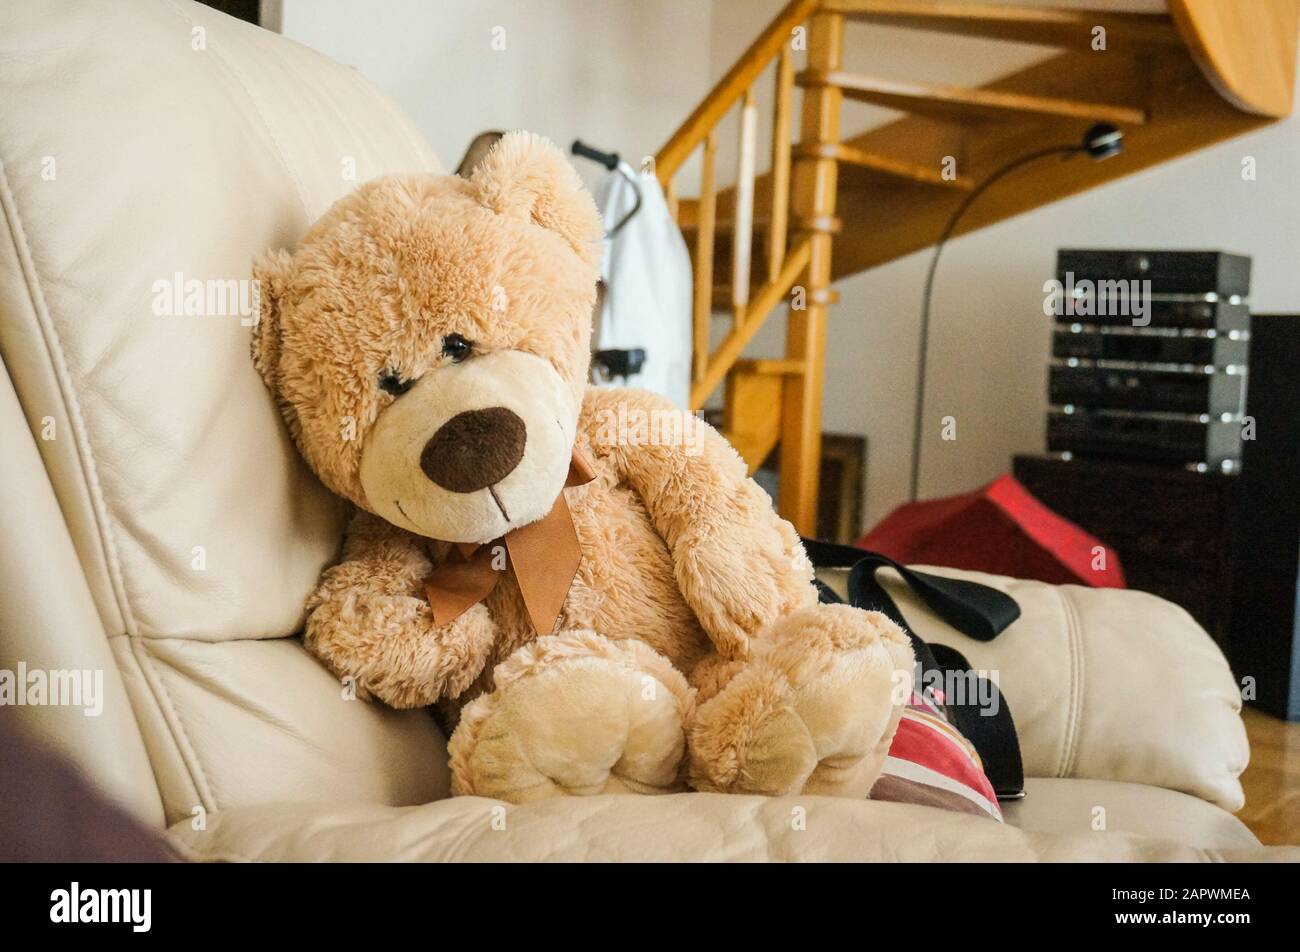 Big fluffy teddy bear on the couch Stock Photo - Alamy